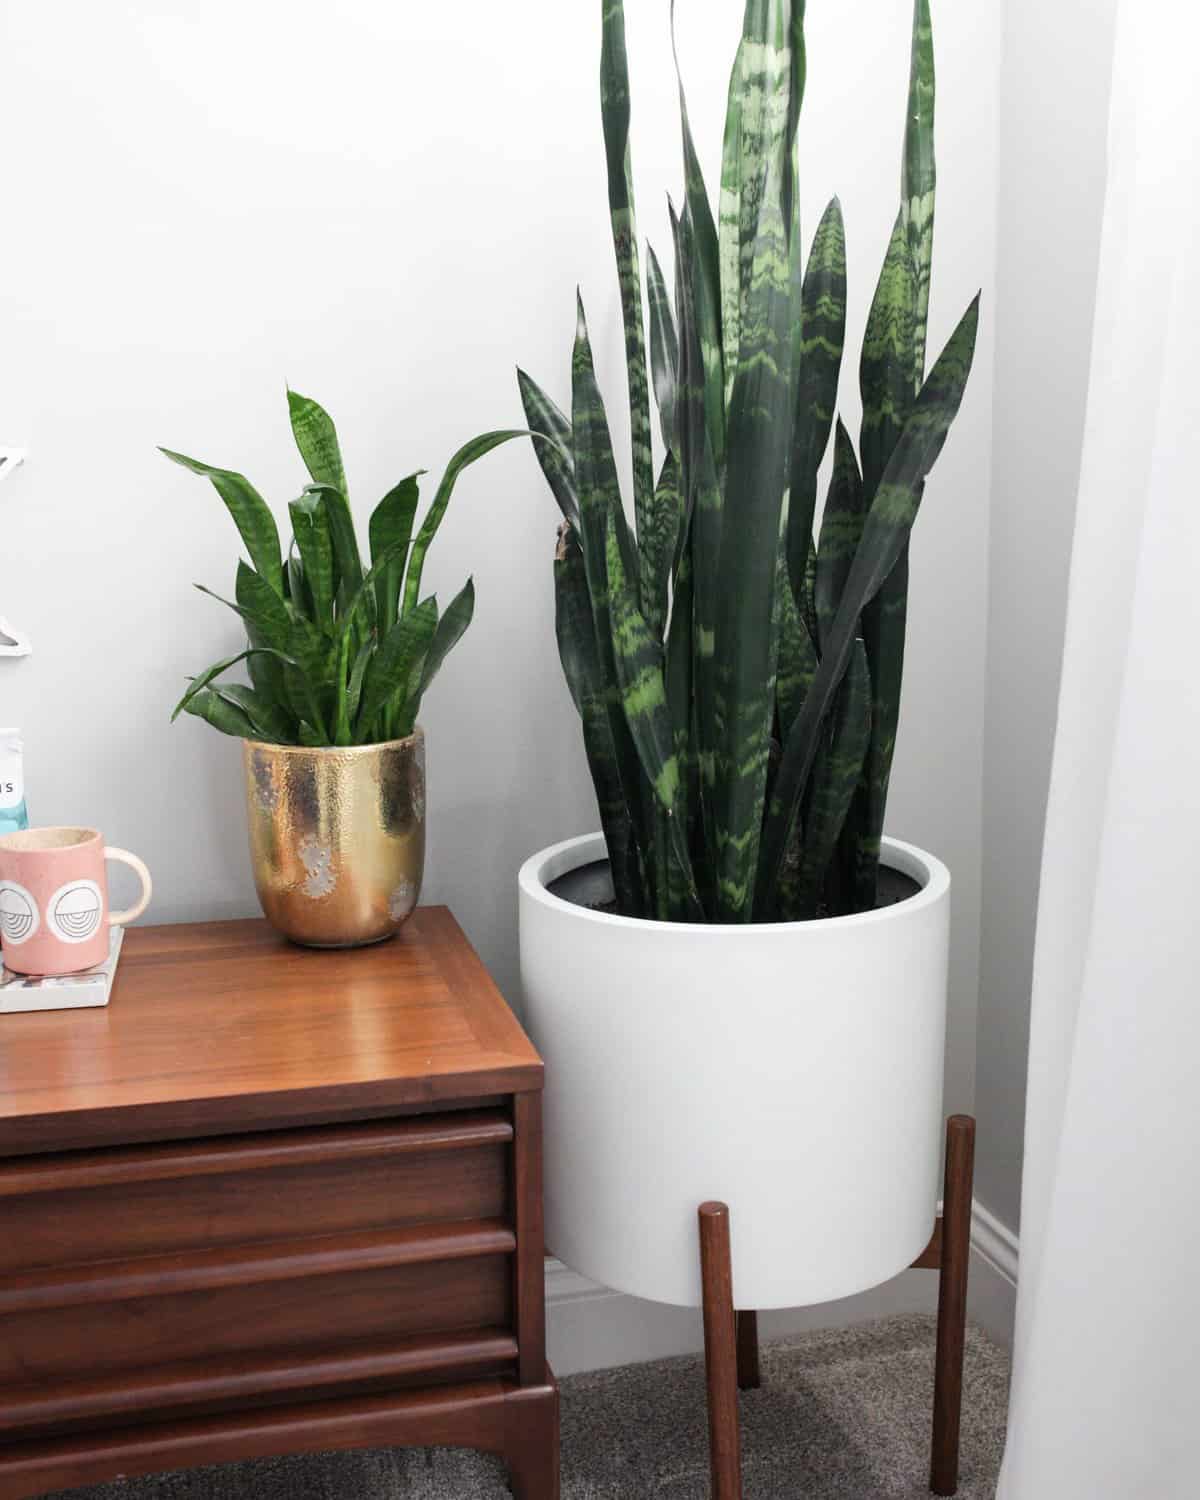 9 Amazing Large Indoor Plants You Need In Your Home - Paisley Plants